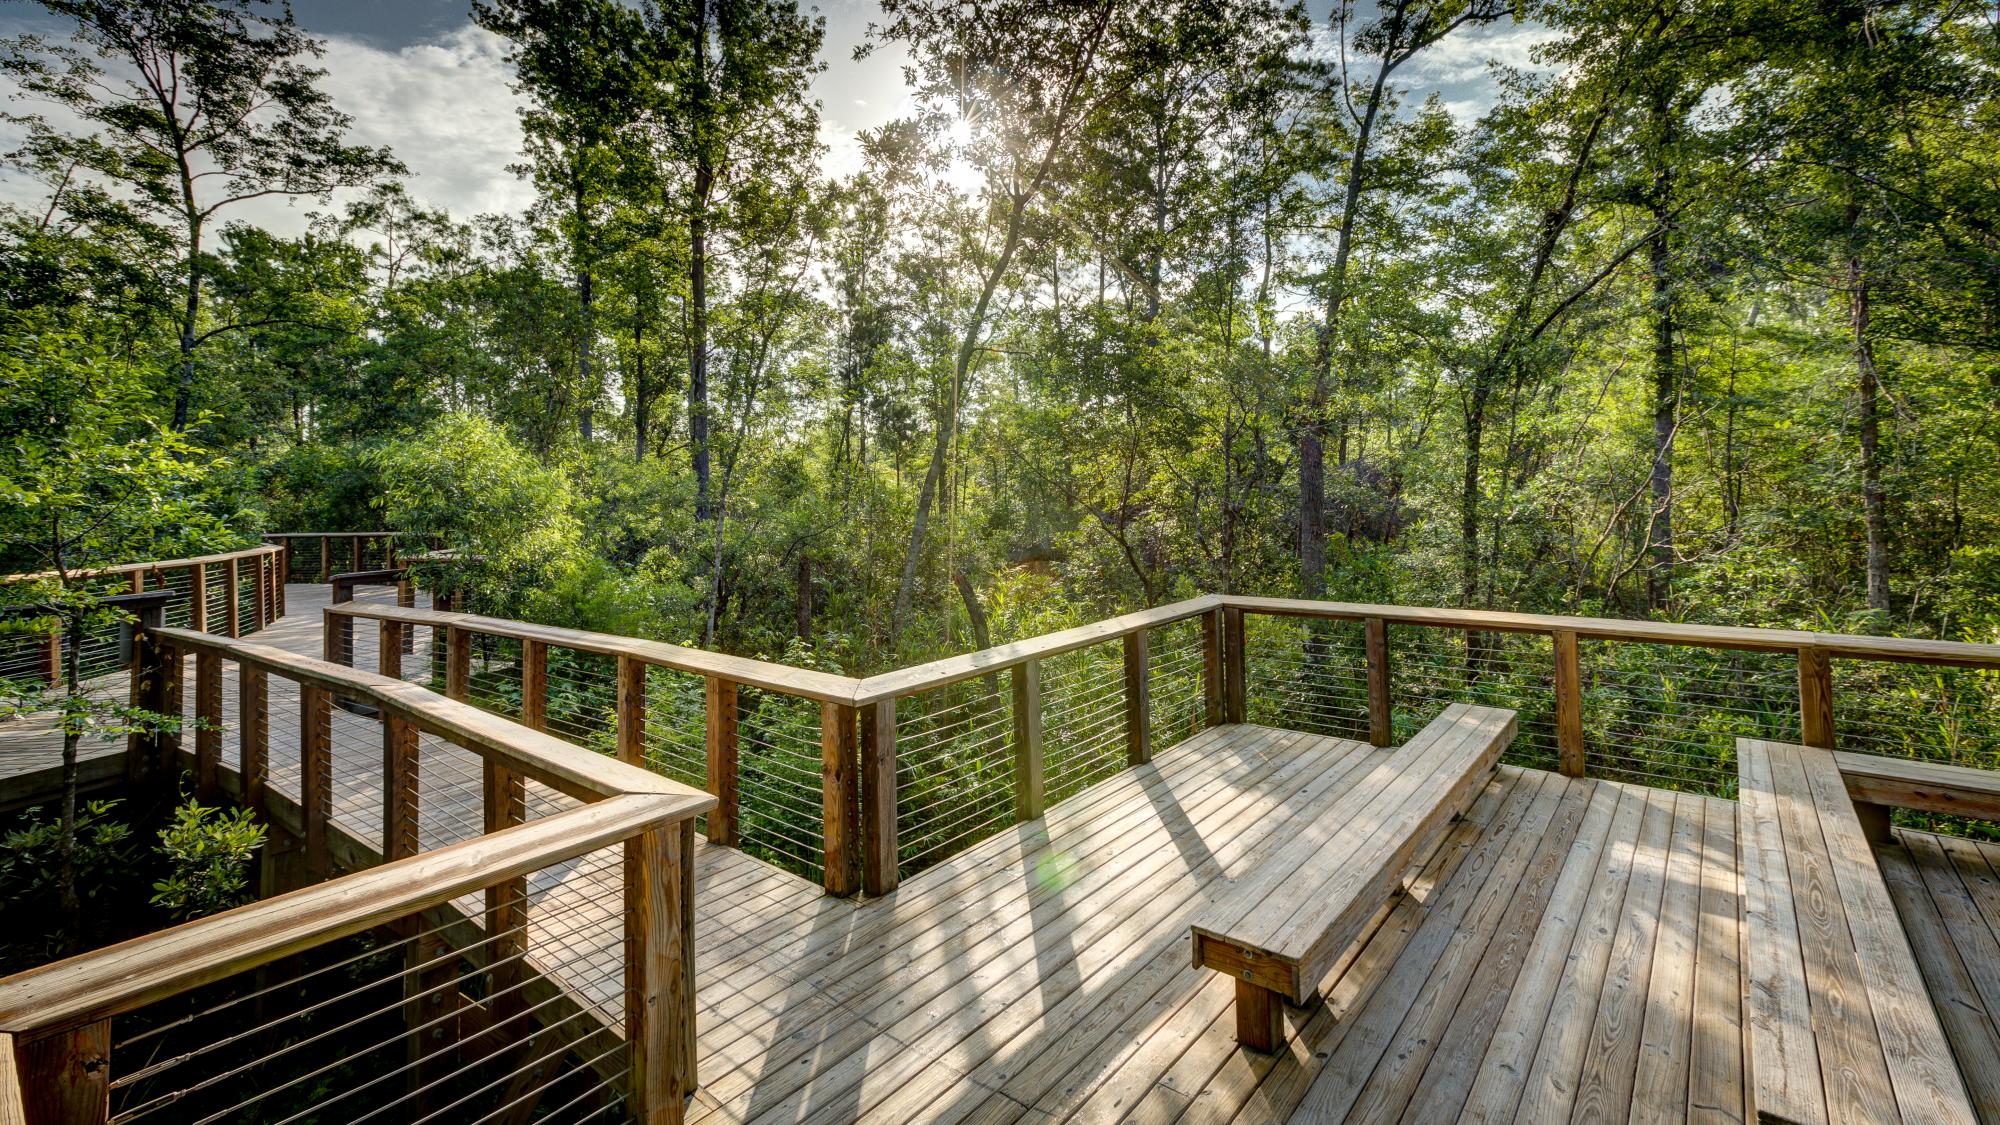 Lush greenery surrounding a wooden walkway with seating